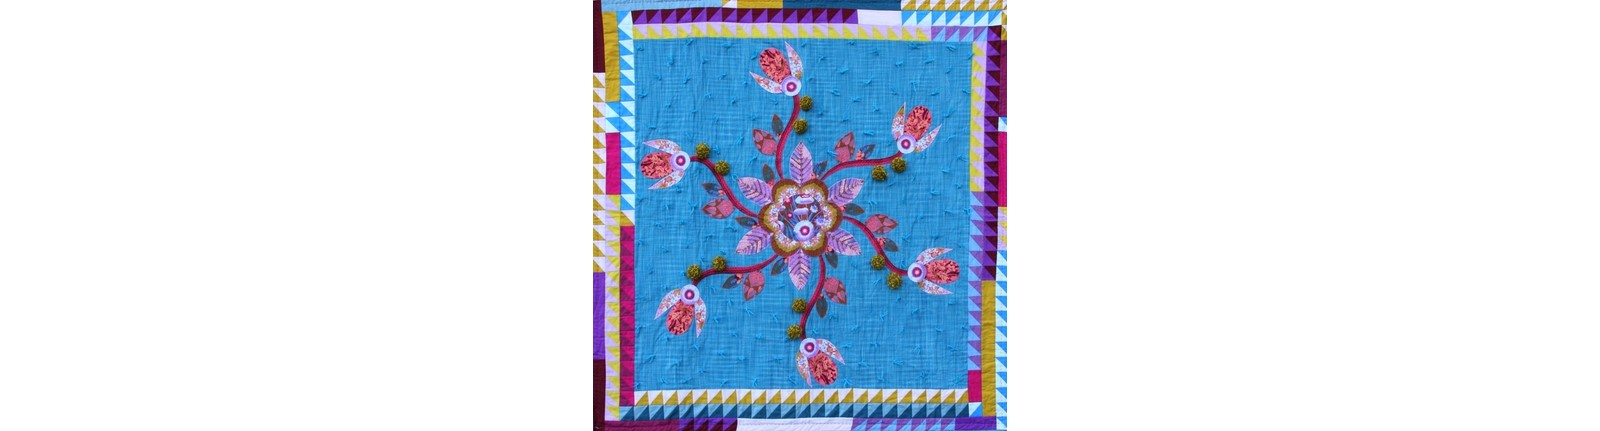 Quilts In Bloom Anna Maria Horner Quilt Camp Norway 2019